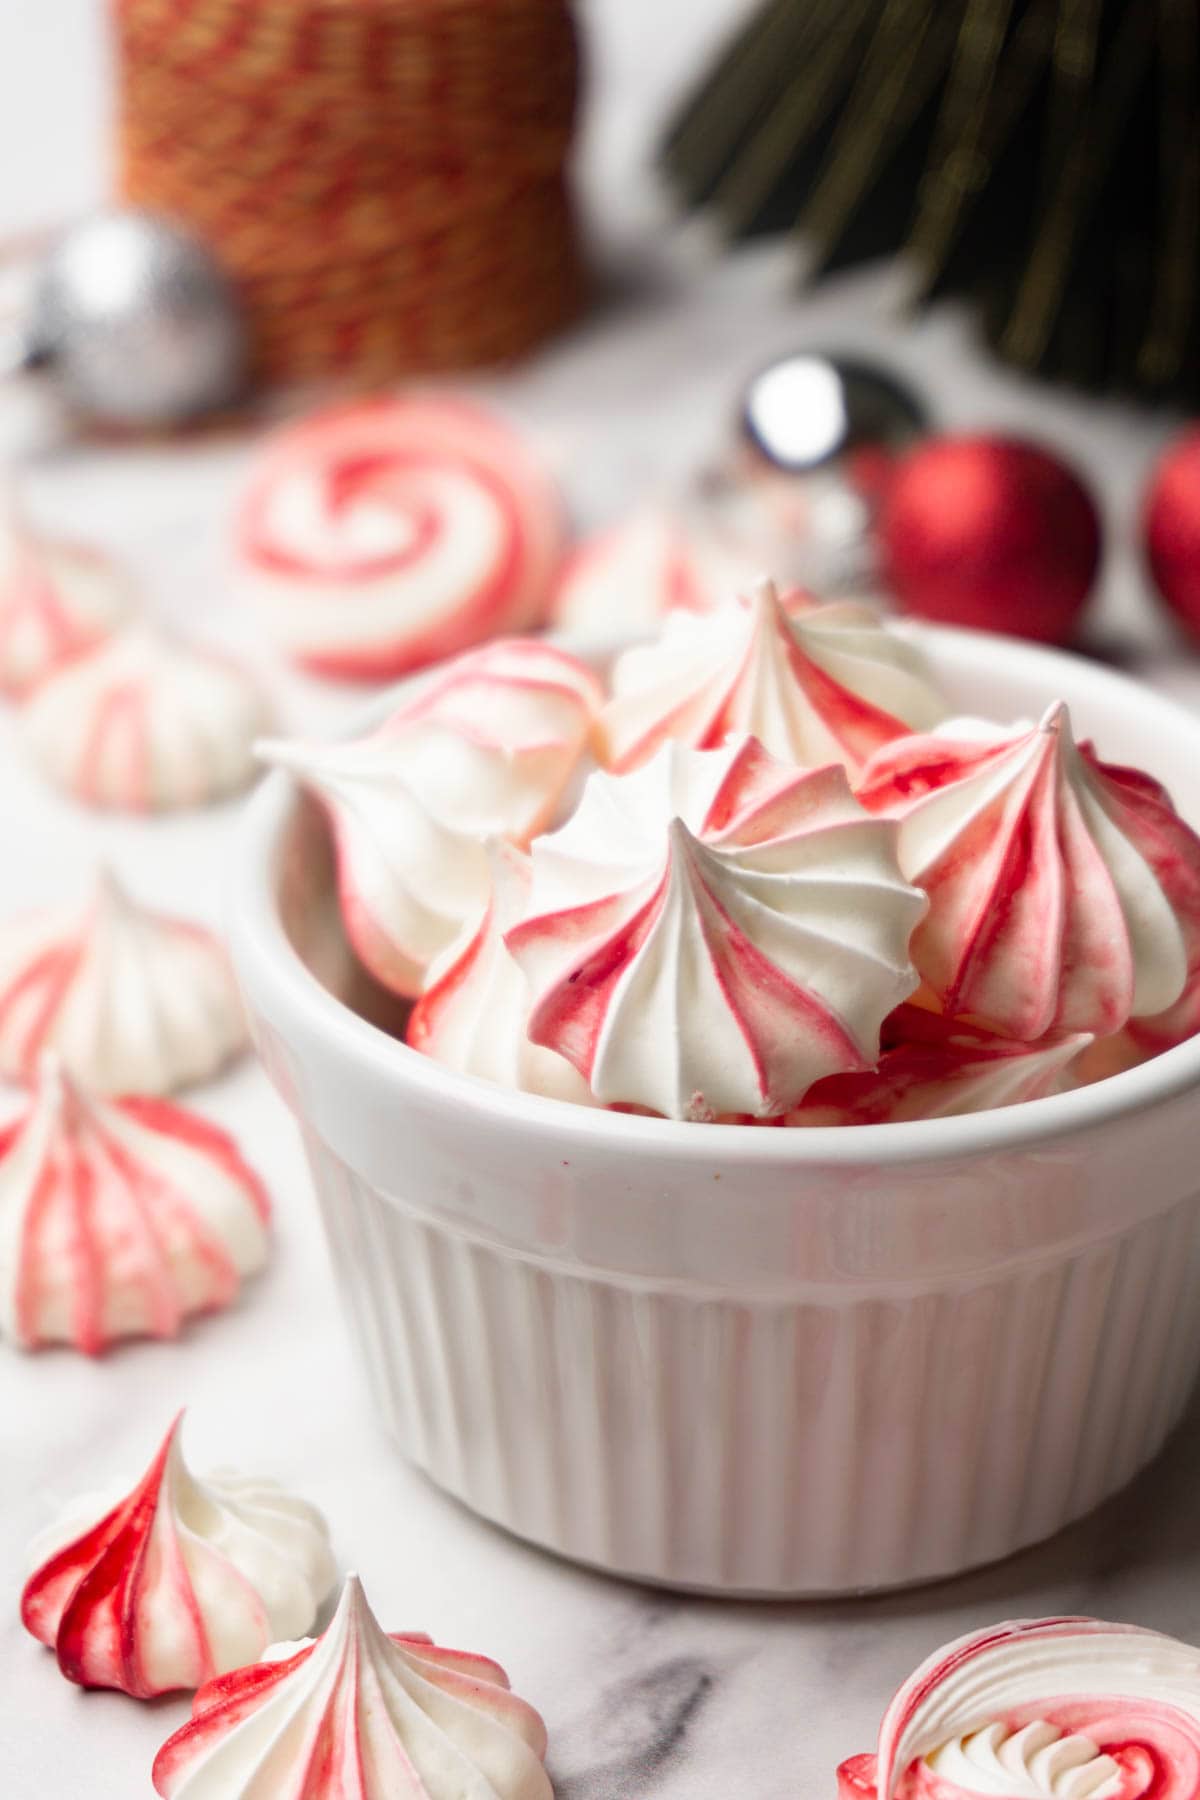 A white bowl with red and white meringue cookies, more cookies are lying around.